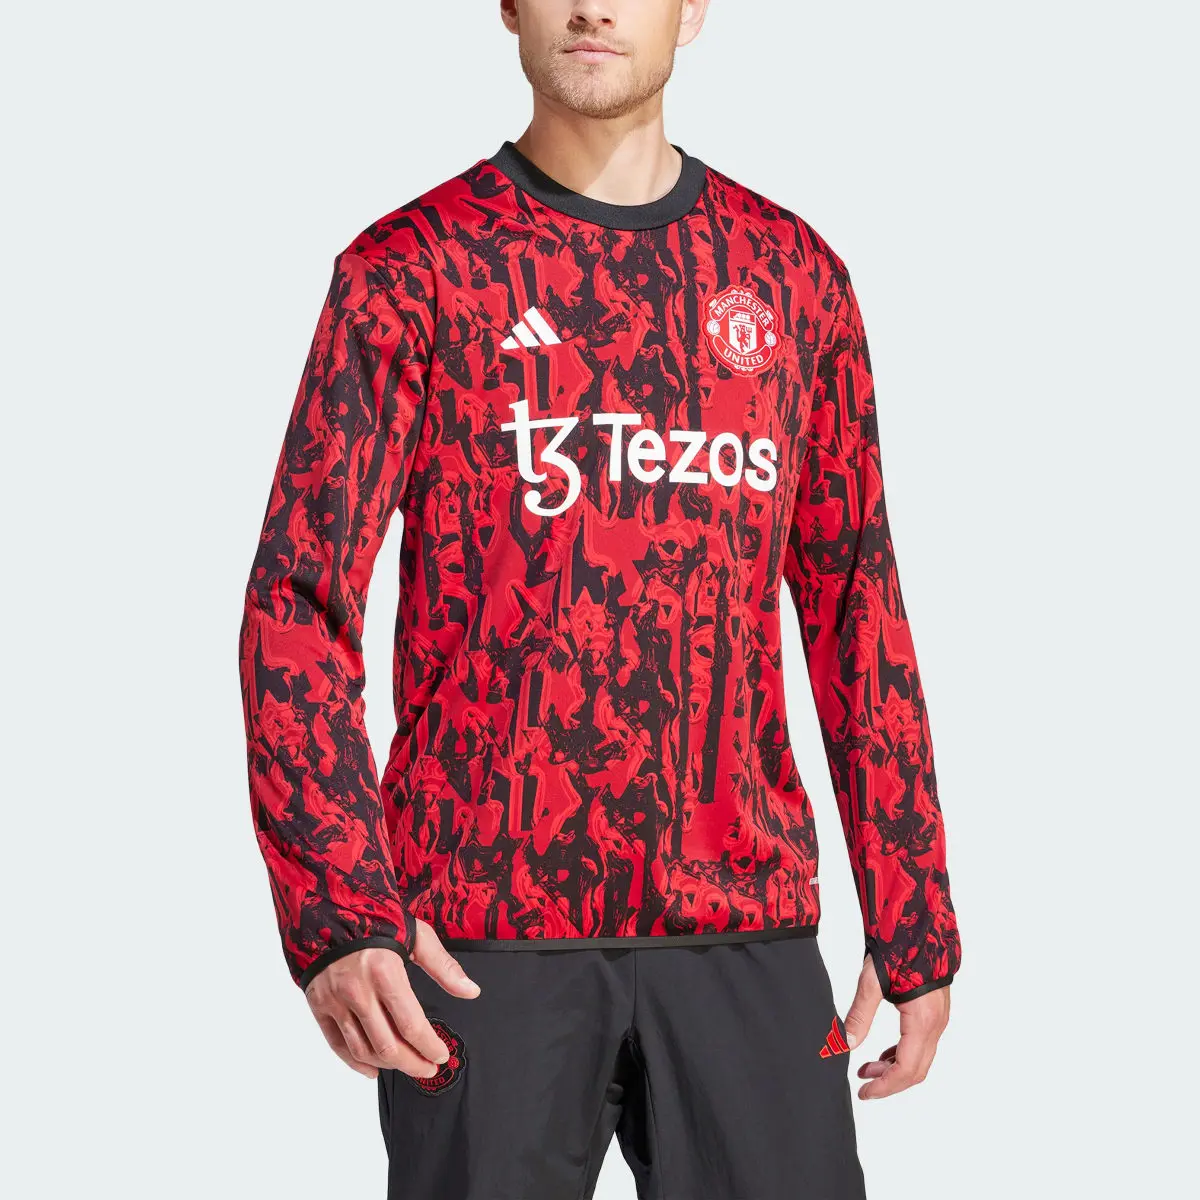 Adidas Manchester United Pre-Match Warm Top. 1